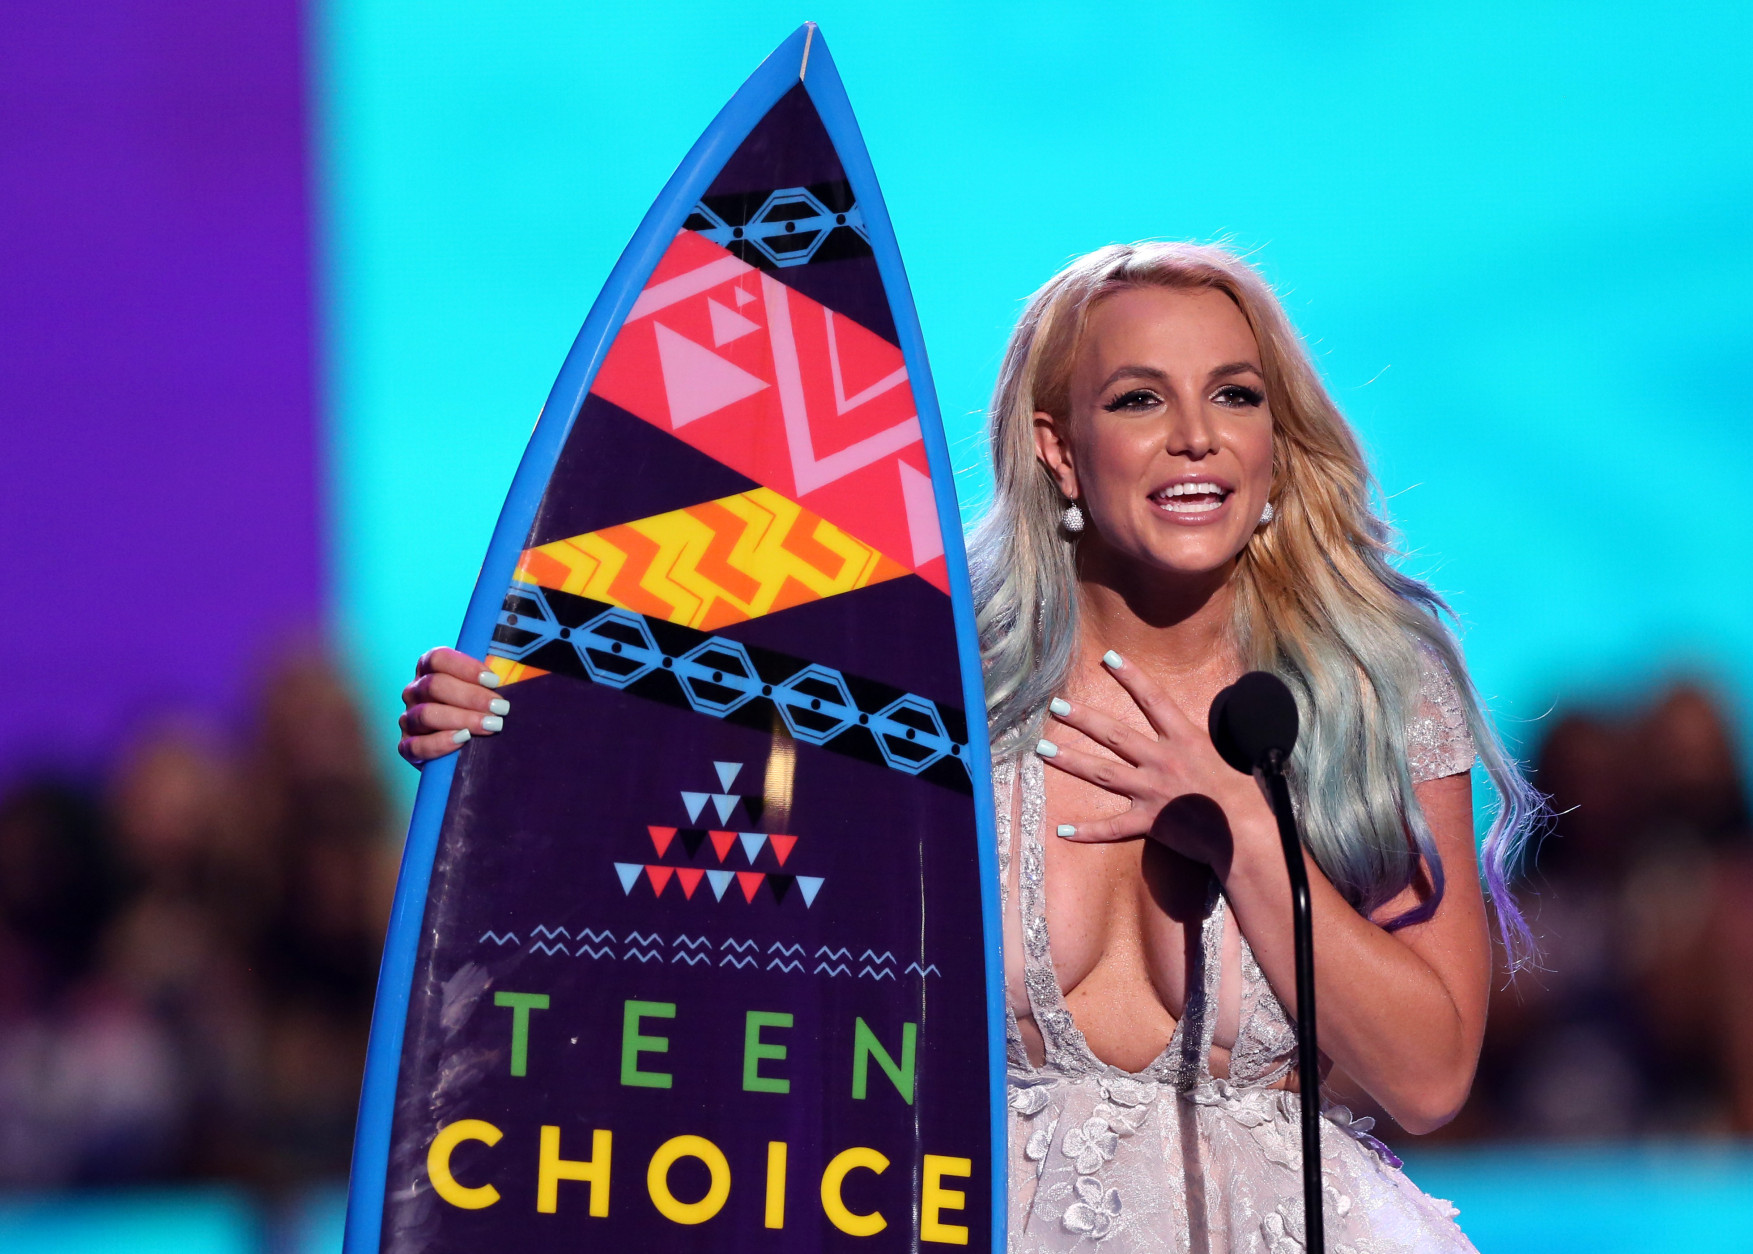 Britney Spears accepts the choice style icon award at the Teen Choice Awards at the Galen Center on Sunday, Aug. 16, 2015, in Los Angeles. (Photo by Matt Sayles/Invision/AP)